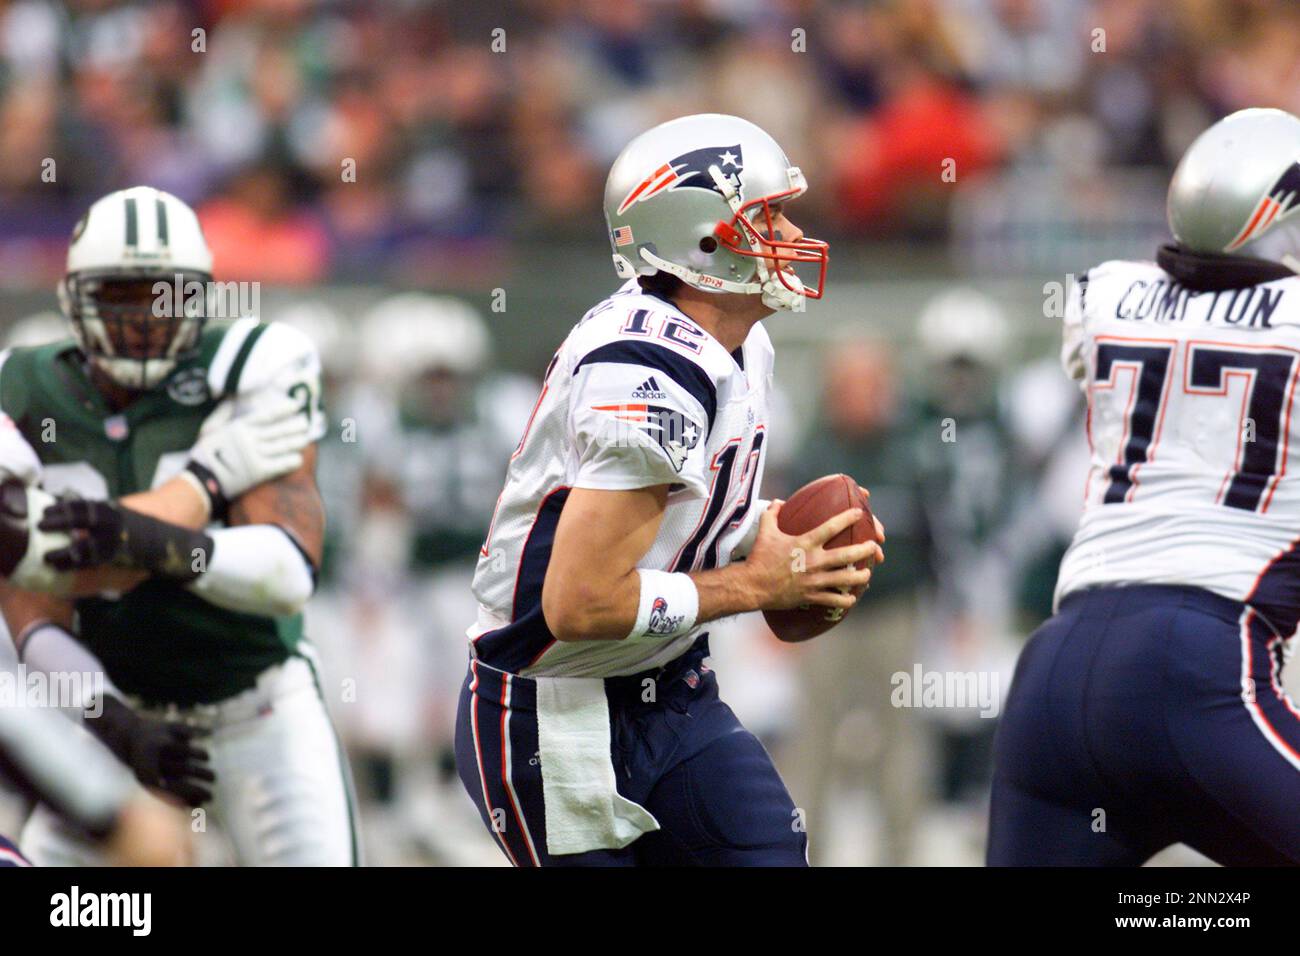 2 Dec 2001: Tom Brady of the New England Patriots during the Pats 17-16  victory